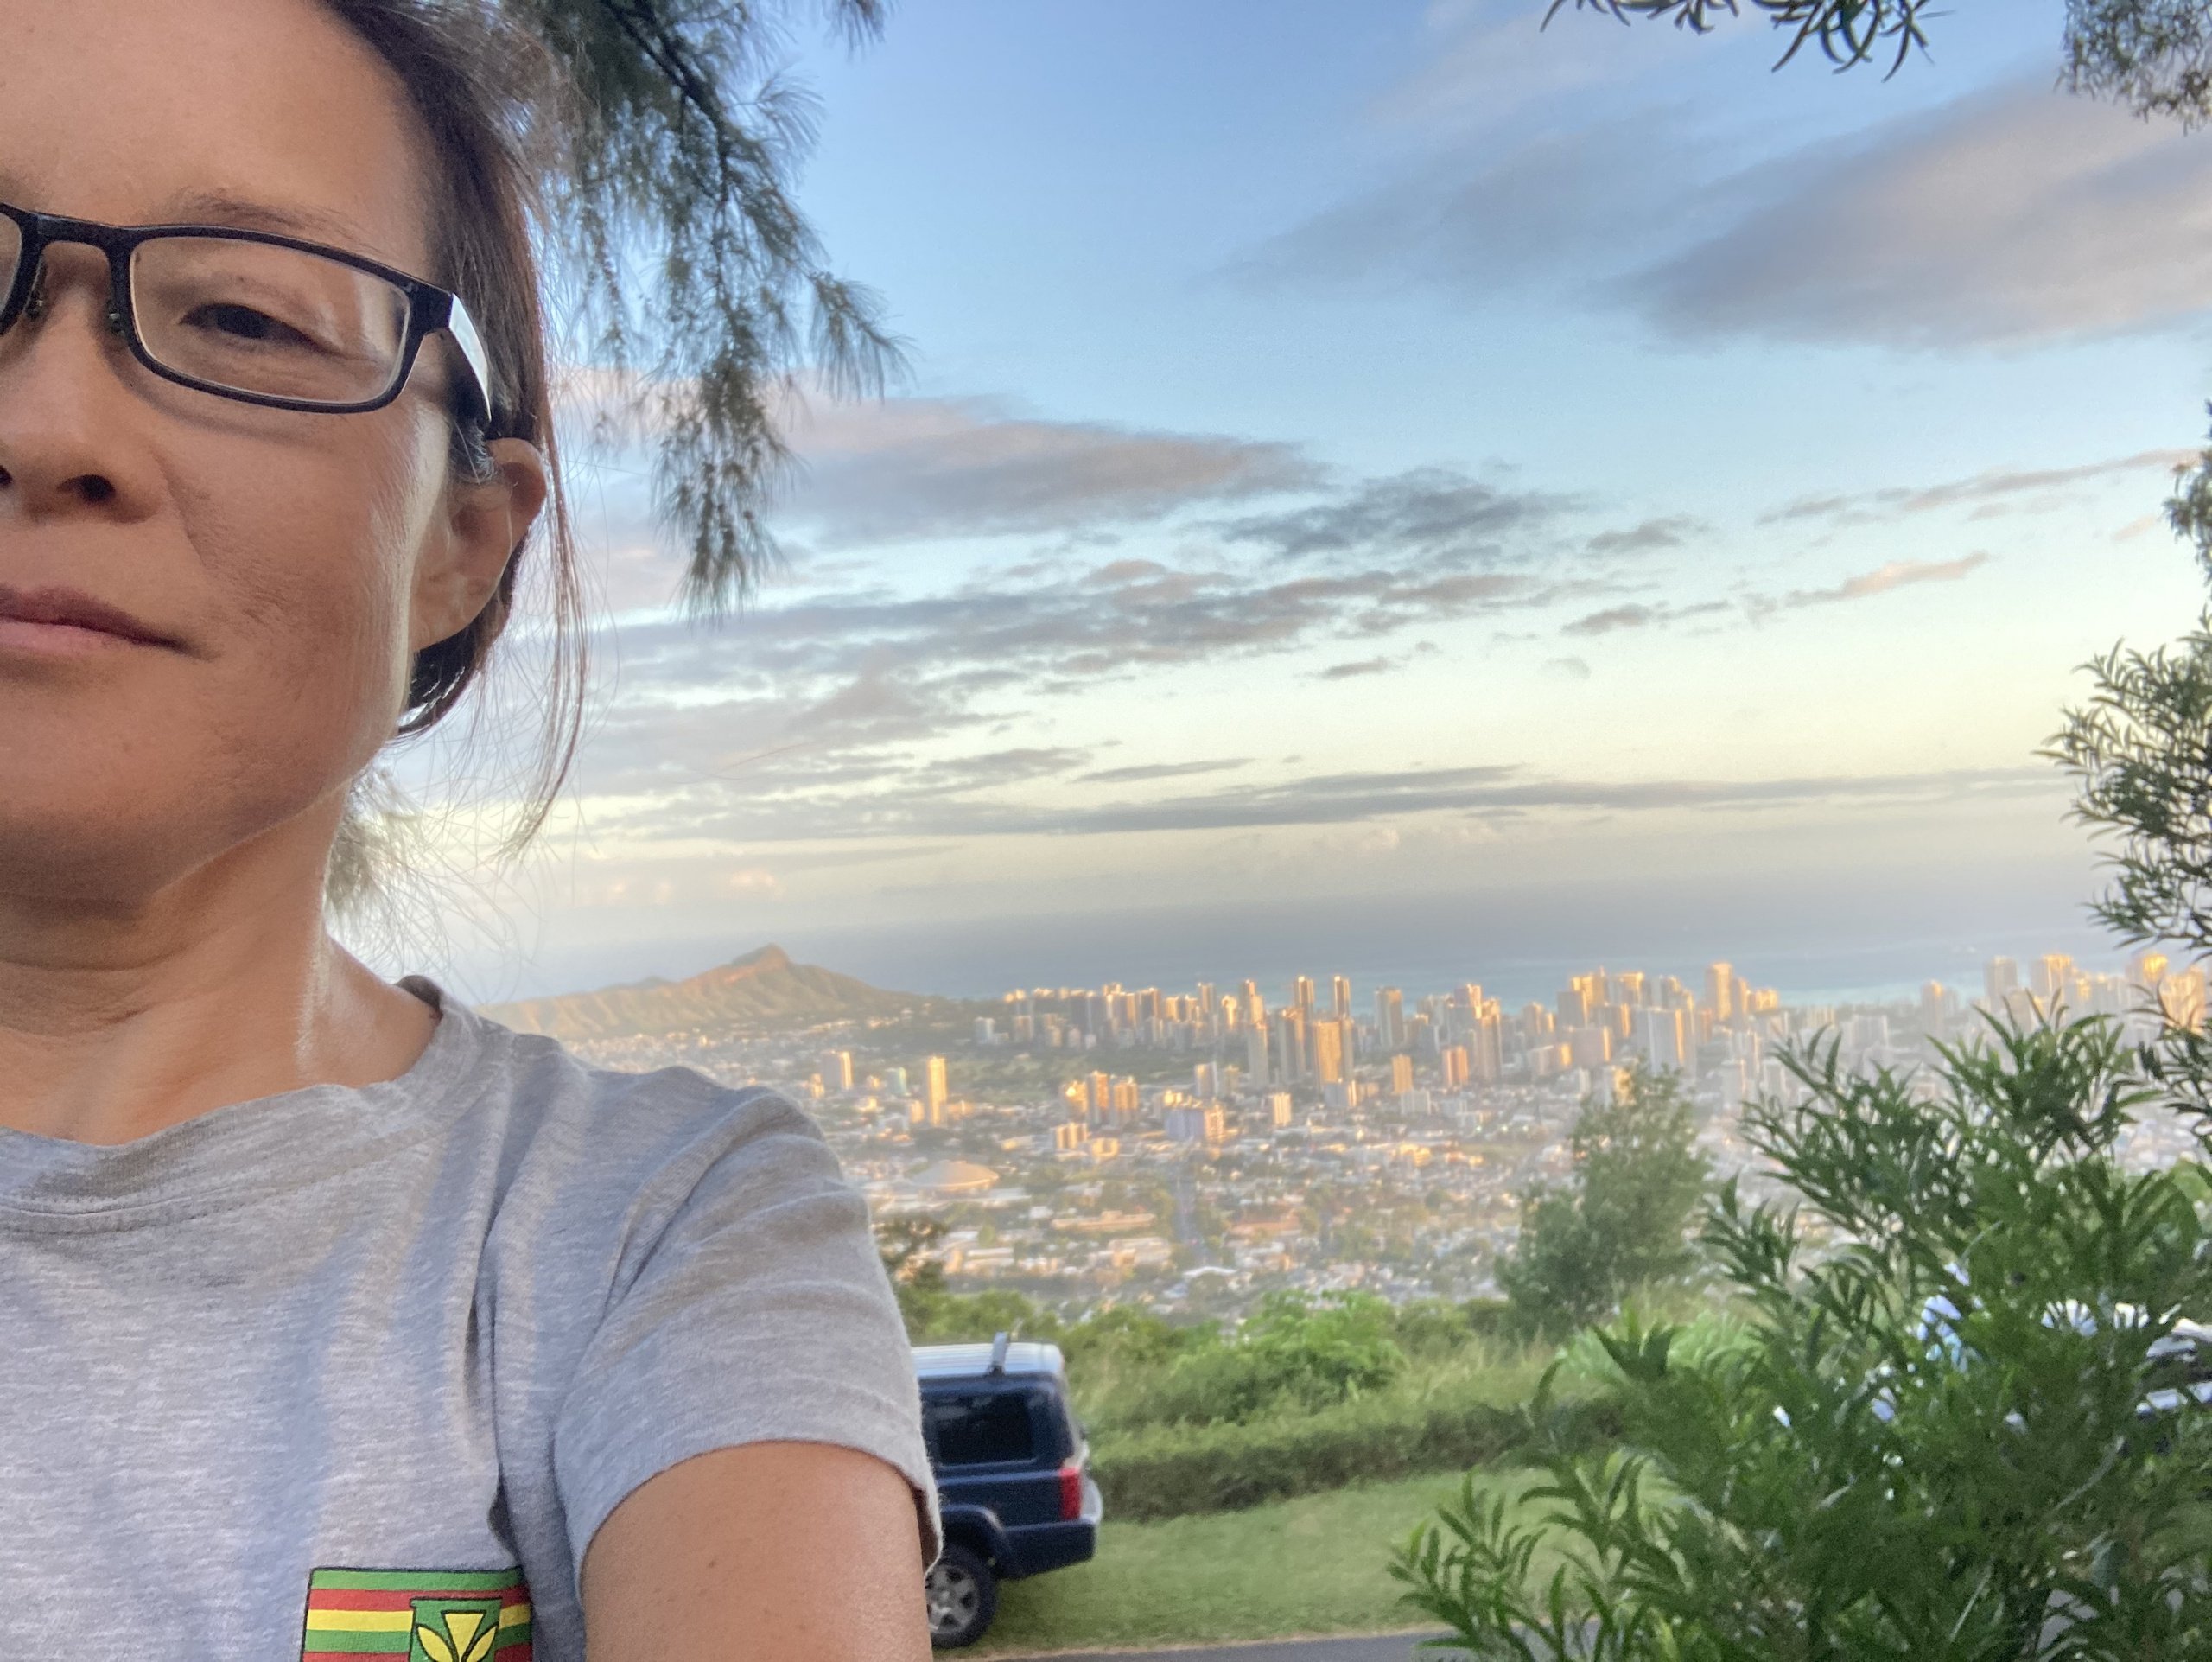 Dr. Stephanie Han wearing glasses in front of a scenic viewpoint